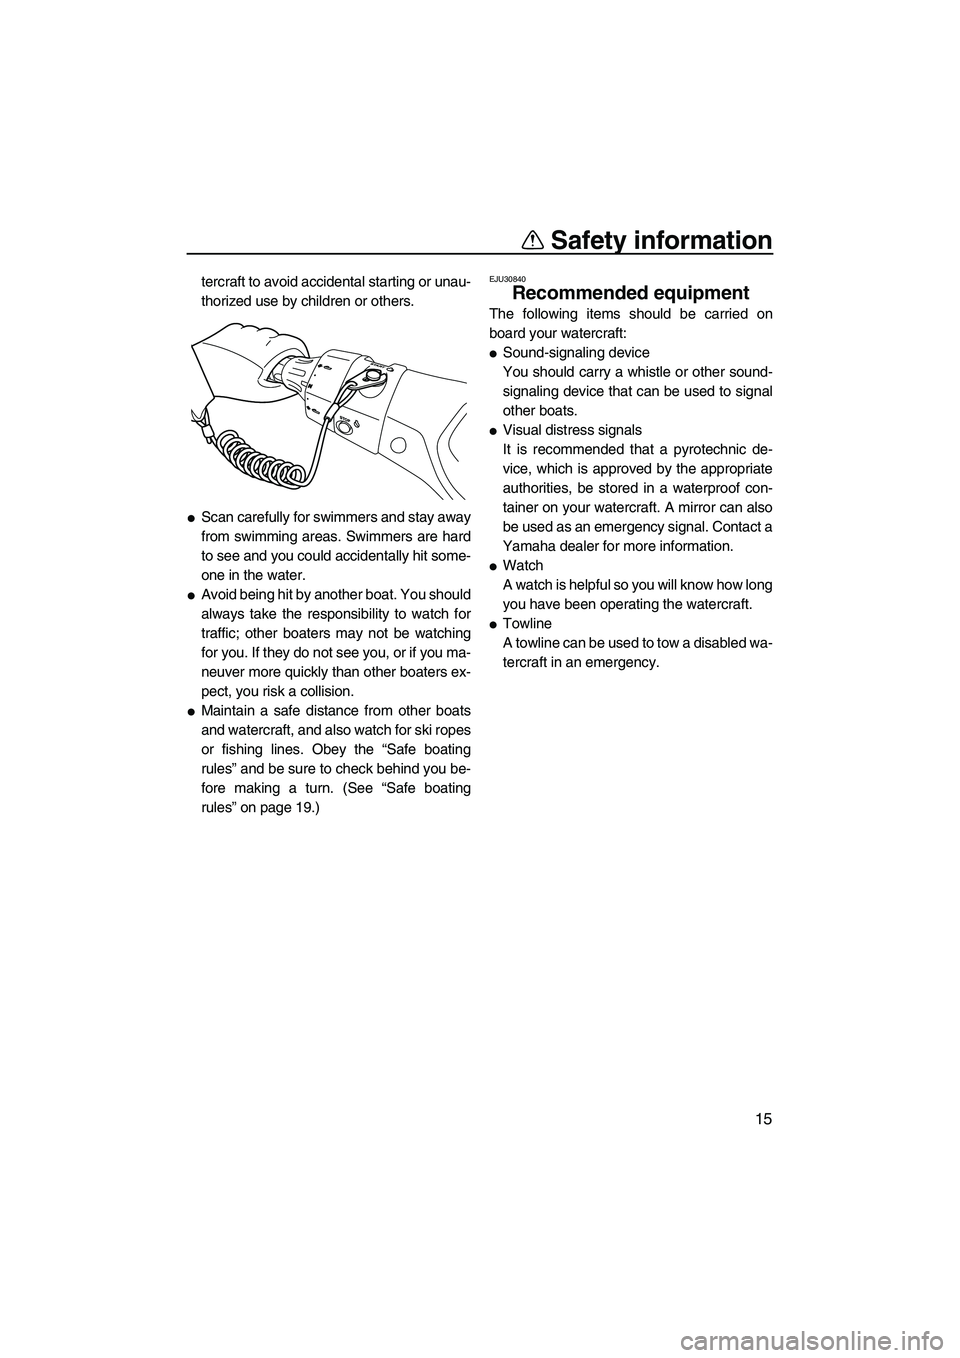 YAMAHA FX HO CRUISER 2013  Owners Manual Safety information
15
tercraft to avoid accidental starting or unau-
thorized use by children or others.
●Scan carefully for swimmers and stay away
from swimming areas. Swimmers are hard
to see and 